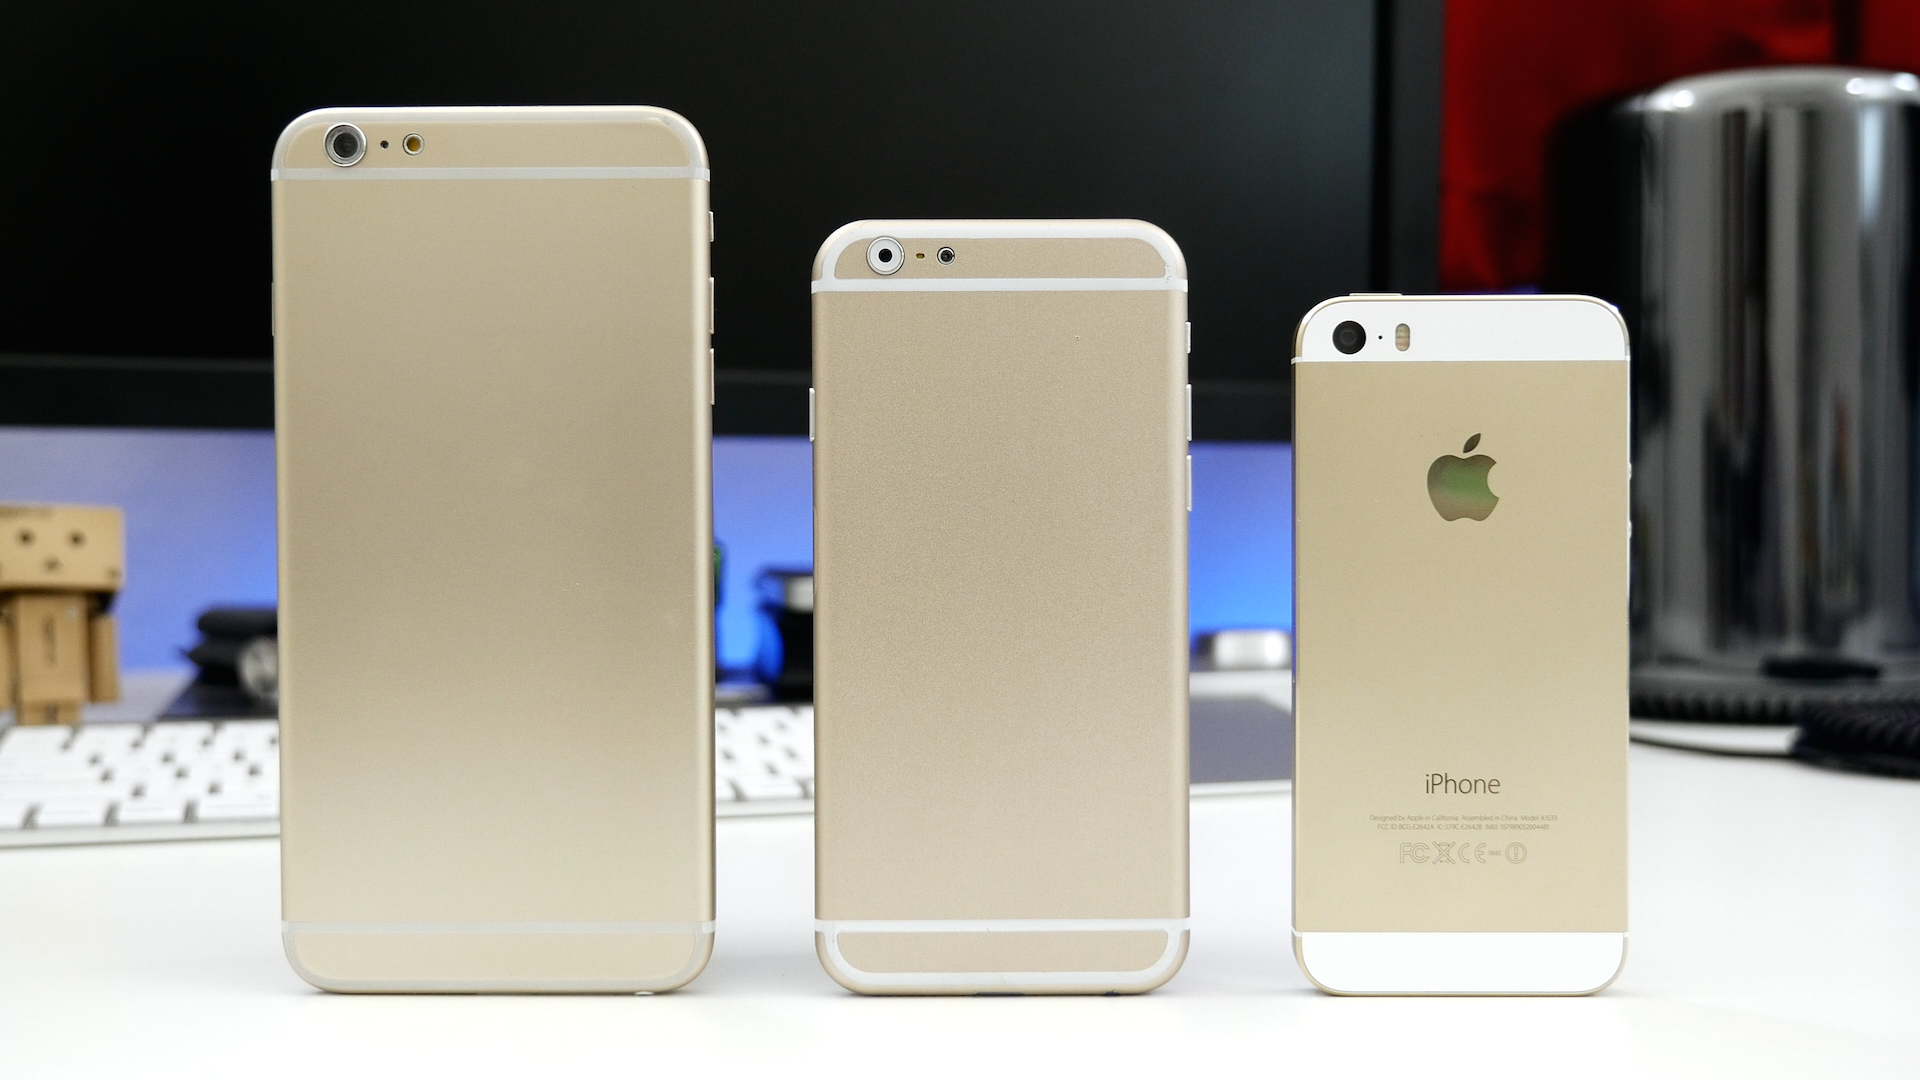 5.5-Inch iPhone 6 mockup compared and Android phablets (Video) - 9to5Mac